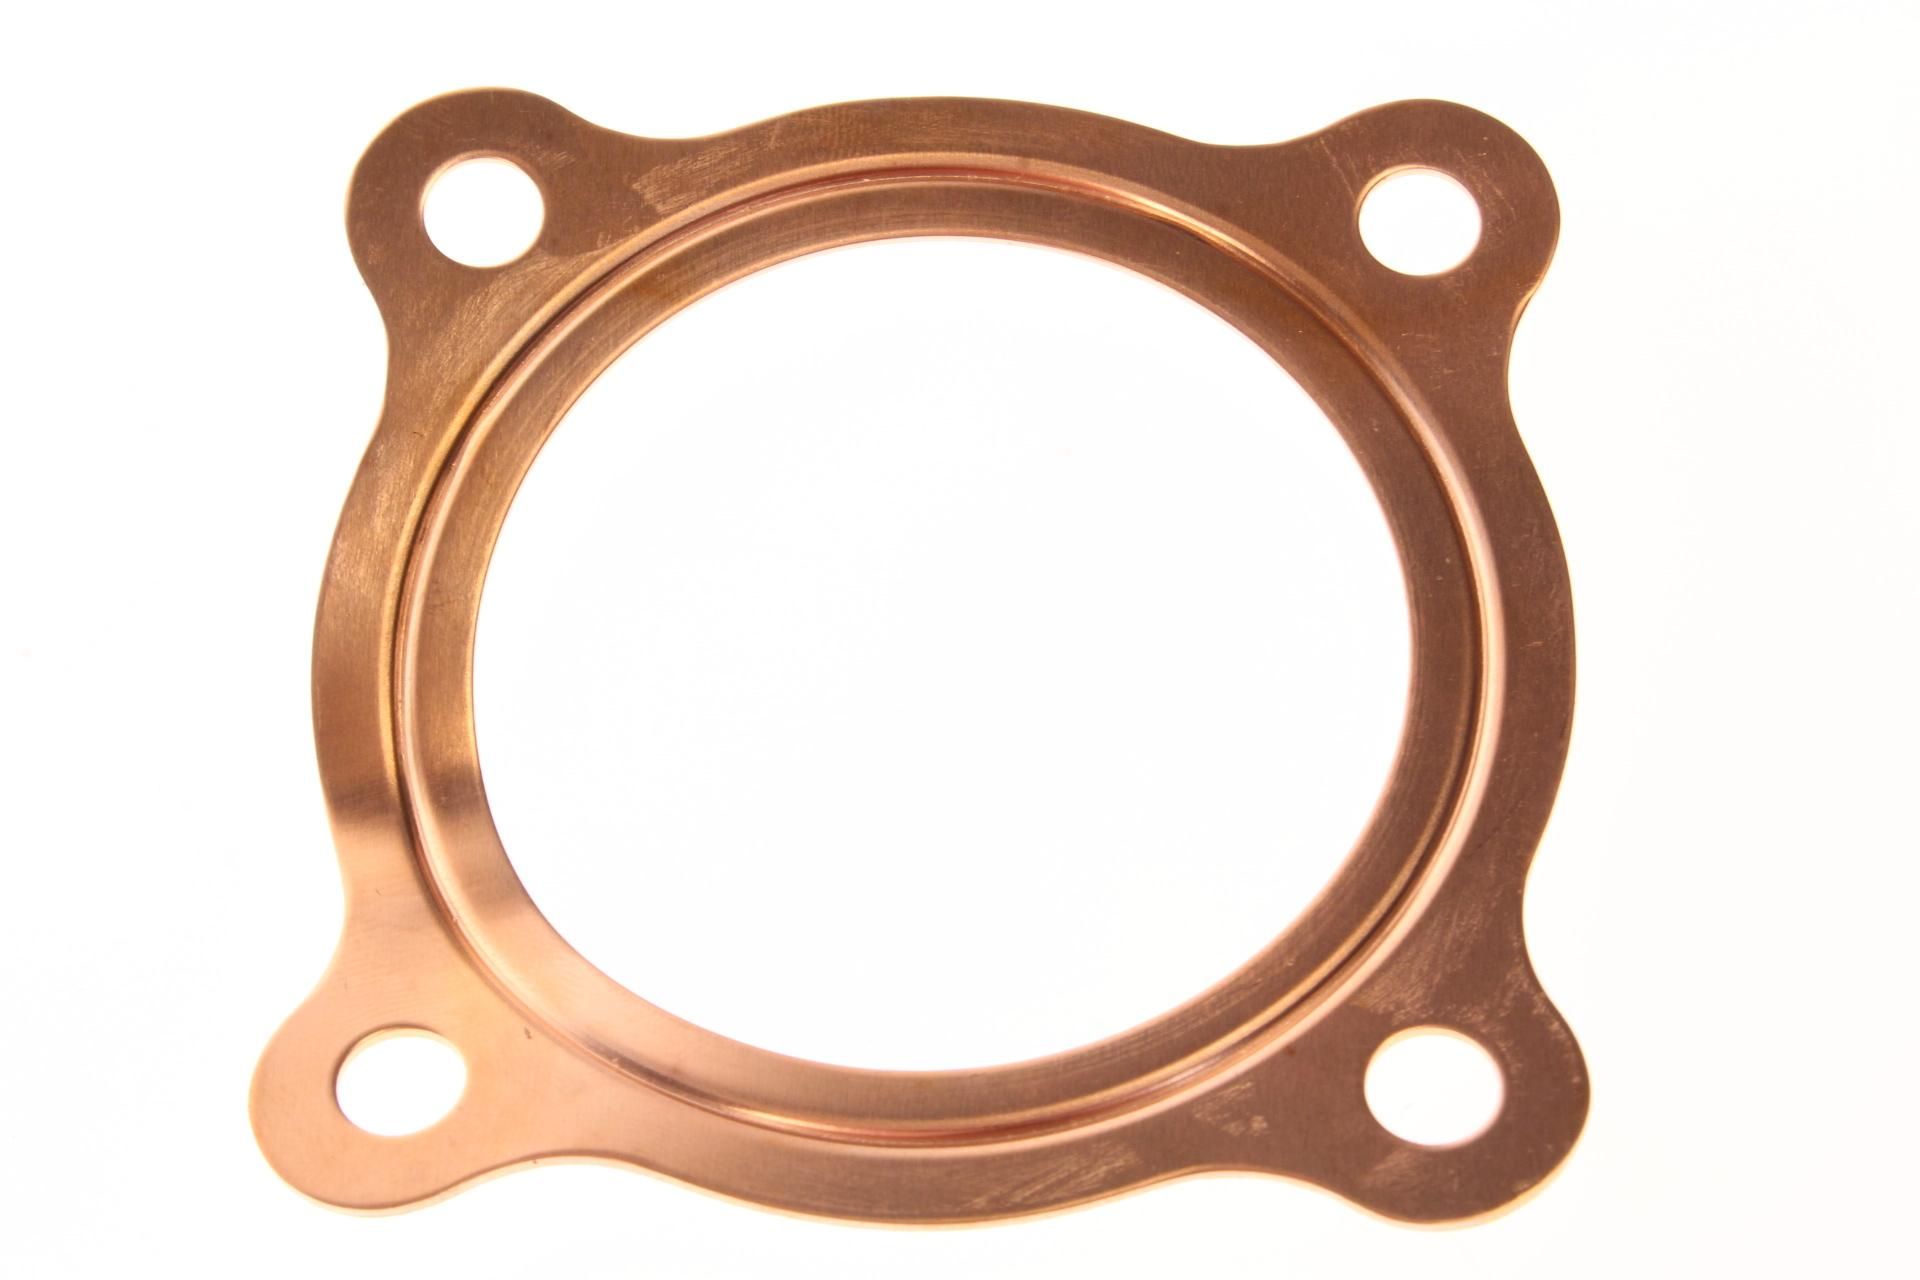 1F5-11181-00-00 Superseded by 2F4-11181-00-00 - GASKET,CYL HEAD 1